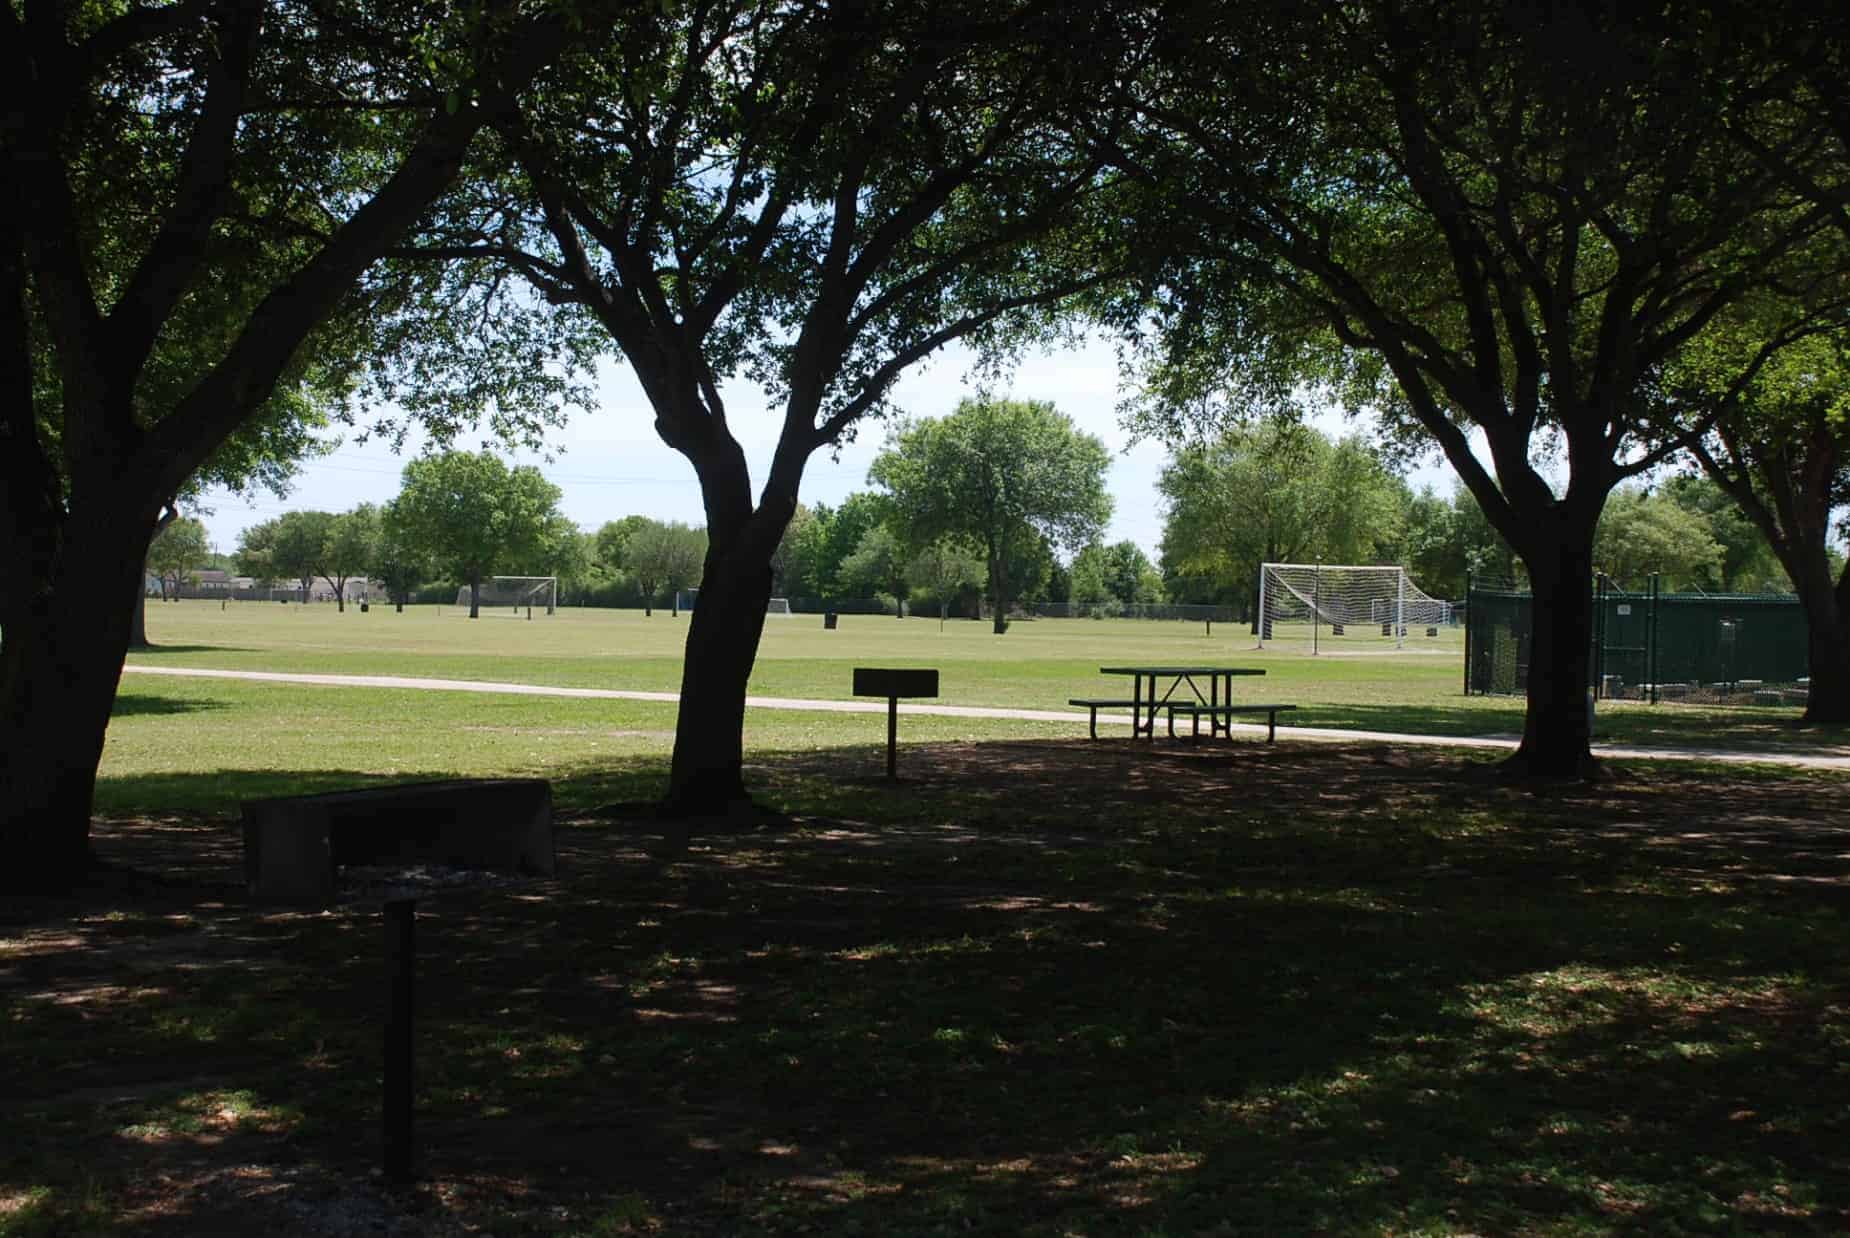 Picnic area adjacent to soccer fields at Zube Park Hockley TX